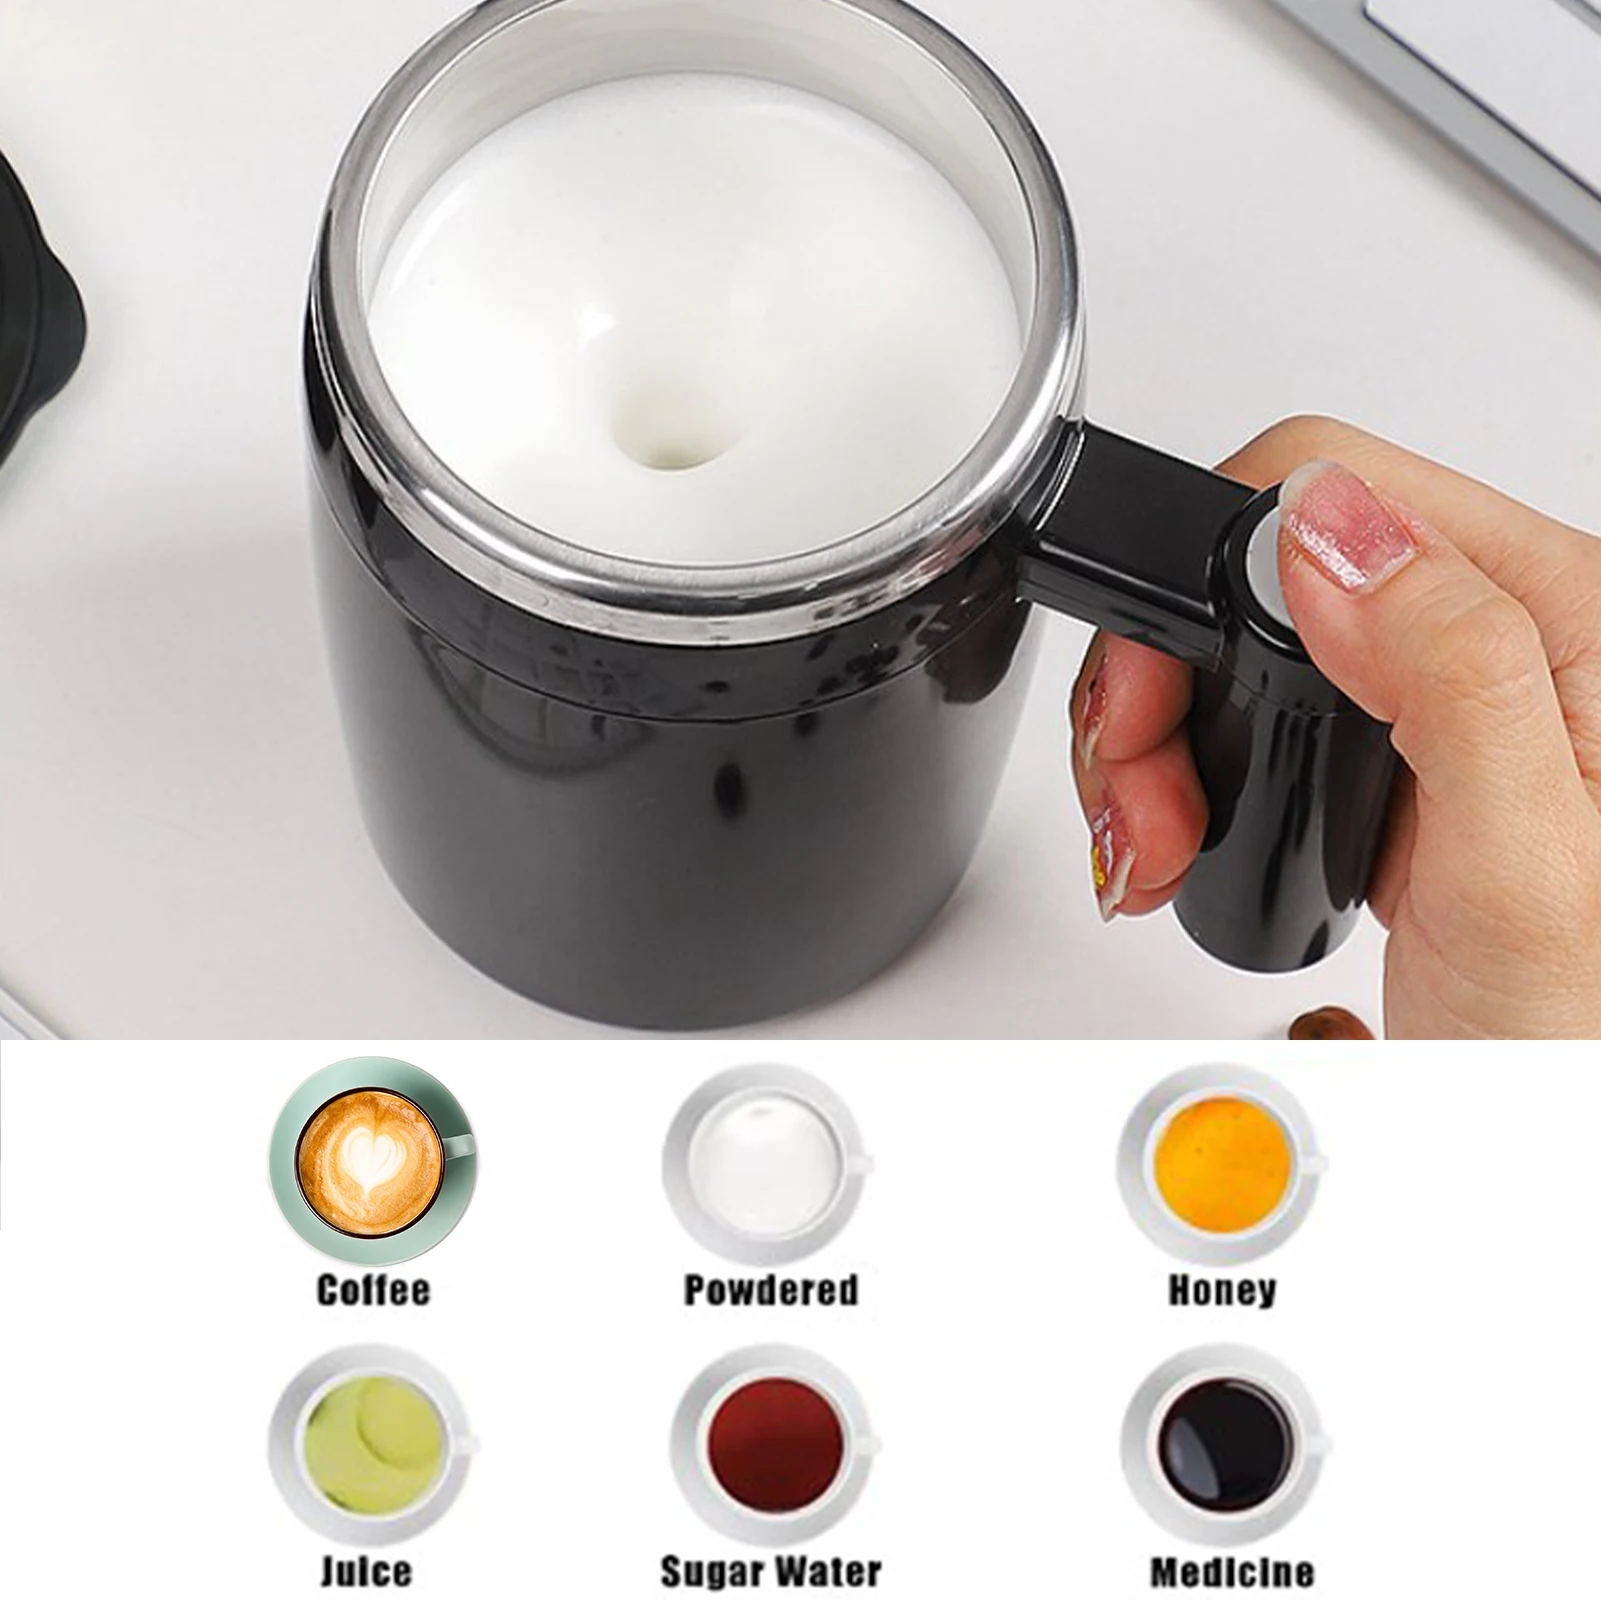 Rechargeable Battery Auto Mixing Cup Magnetic Stainless Steel Mug